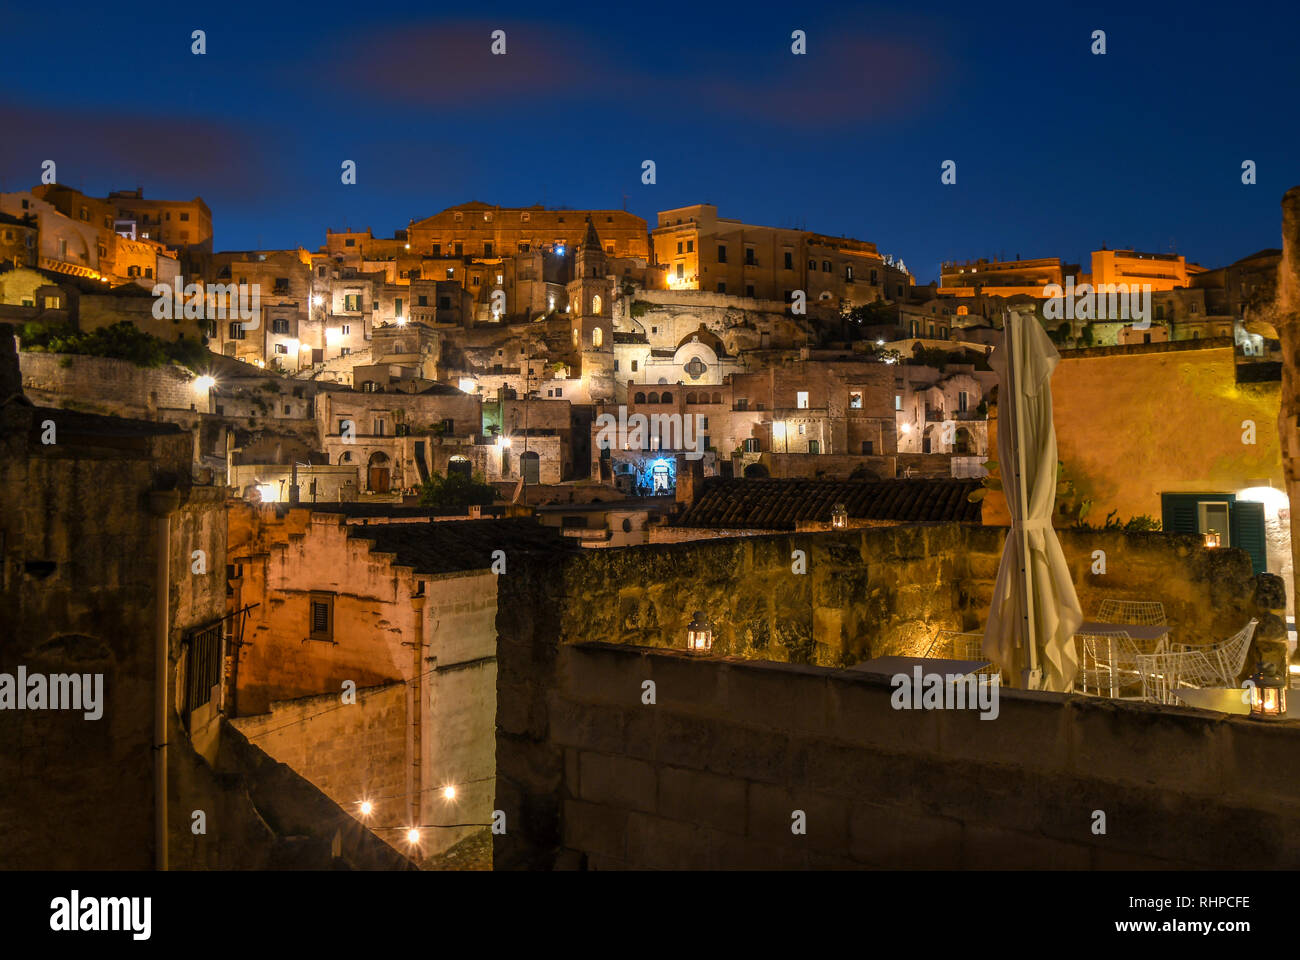 Evening view of the ancient city of Matera, Italy, with the colored lights highlighting patios of sidewalk cafes and churches in the historic village Stock Photo